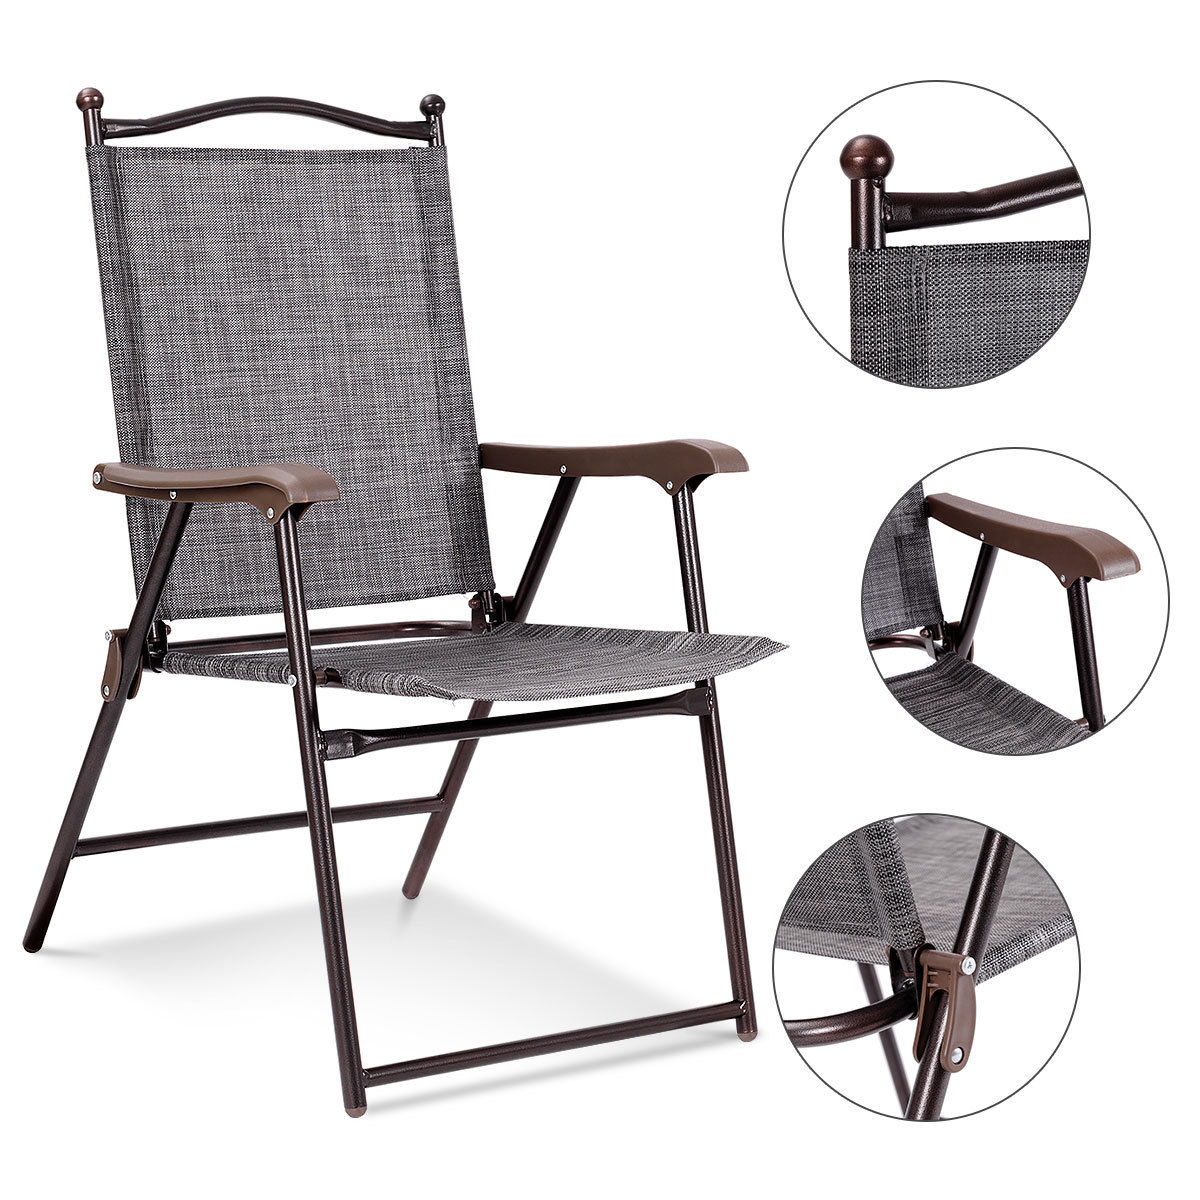 Costway Set of 2 Patio Folding Sling Back Chairs Camping Deck Garden Beach Gray - image 5 of 9